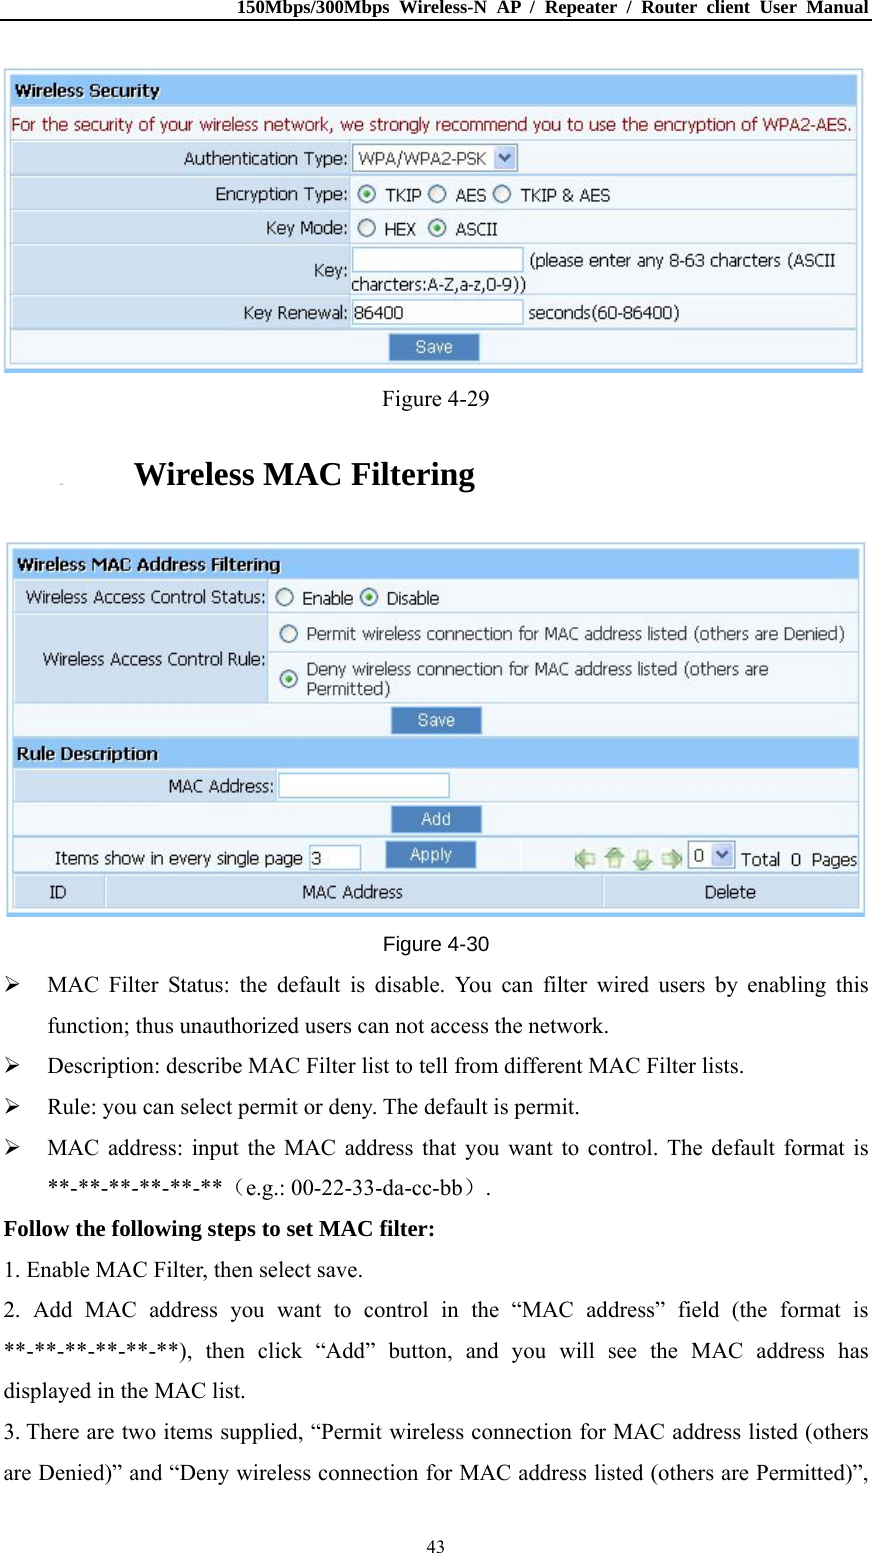 150Mbps/300Mbps Wireless-N AP / Repeater / Router client User Manual  43 Figure 4-29 4.5.3. Wireless MAC Filtering  Figure 4-30  MAC Filter Status: the default is disable. You can filter wired users by enabling this function; thus unauthorized users can not access the network.  Description: describe MAC Filter list to tell from different MAC Filter lists.  Rule: you can select permit or deny. The default is permit.  MAC address: input the MAC address that you want to control. The default format is **-**-**-**-**-**（e.g.: 00-22-33-da-cc-bb）. Follow the following steps to set MAC filter:   1. Enable MAC Filter, then select save. 2. Add MAC address you want to control in the “MAC address” field (the format is **-**-**-**-**-**), then click “Add” button, and you will see the MAC address has displayed in the MAC list. 3. There are two items supplied, “Permit wireless connection for MAC address listed (others are Denied)” and “Deny wireless connection for MAC address listed (others are Permitted)”, 